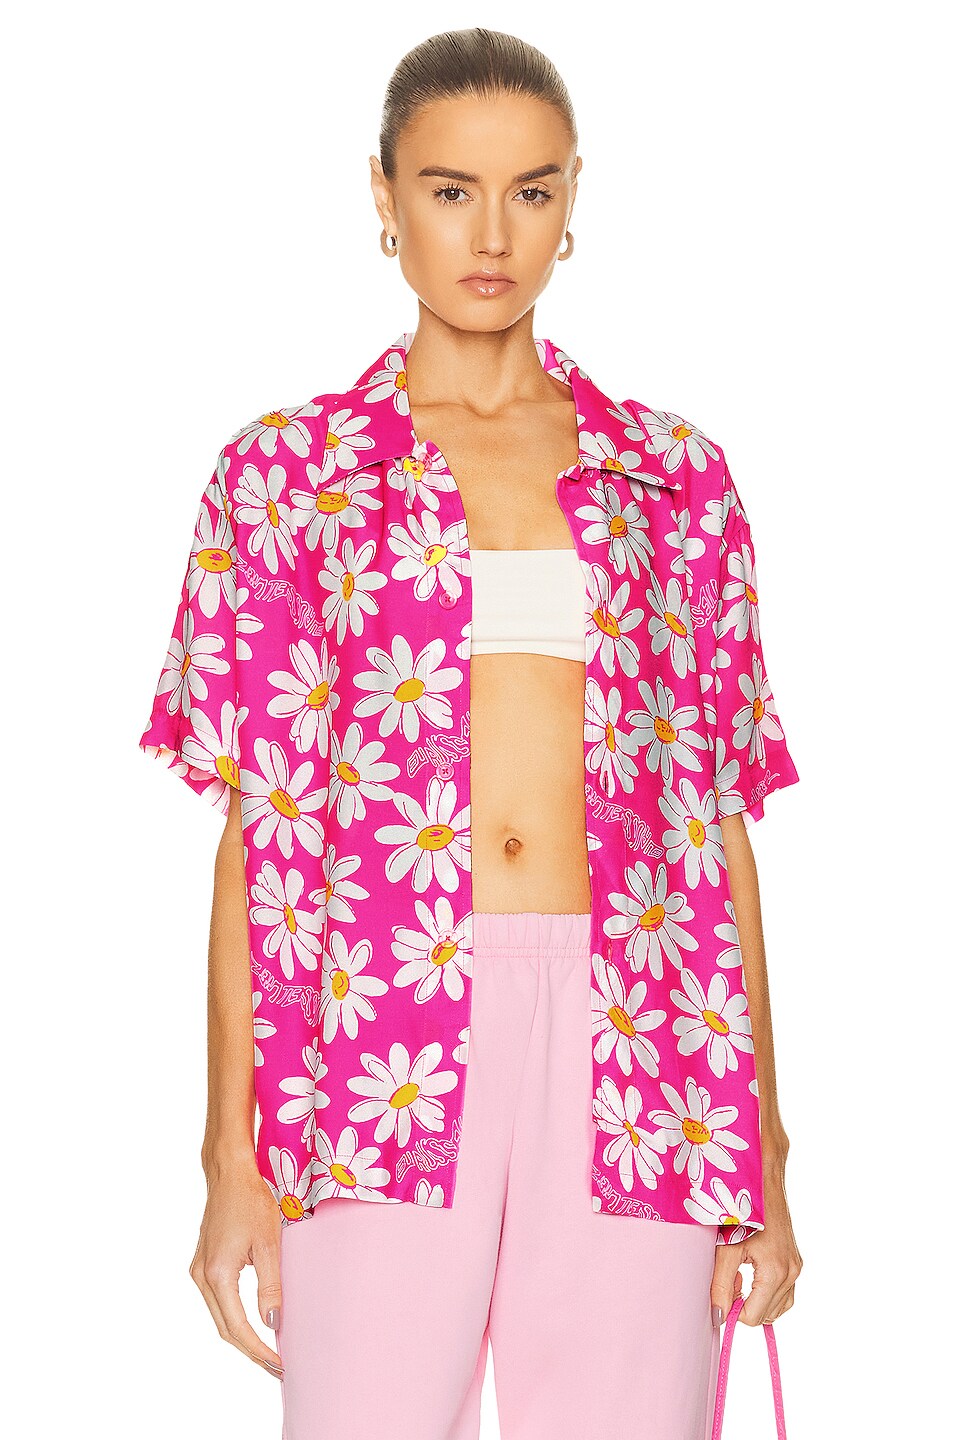 Image 1 of ERL Floral Shirt in Pink